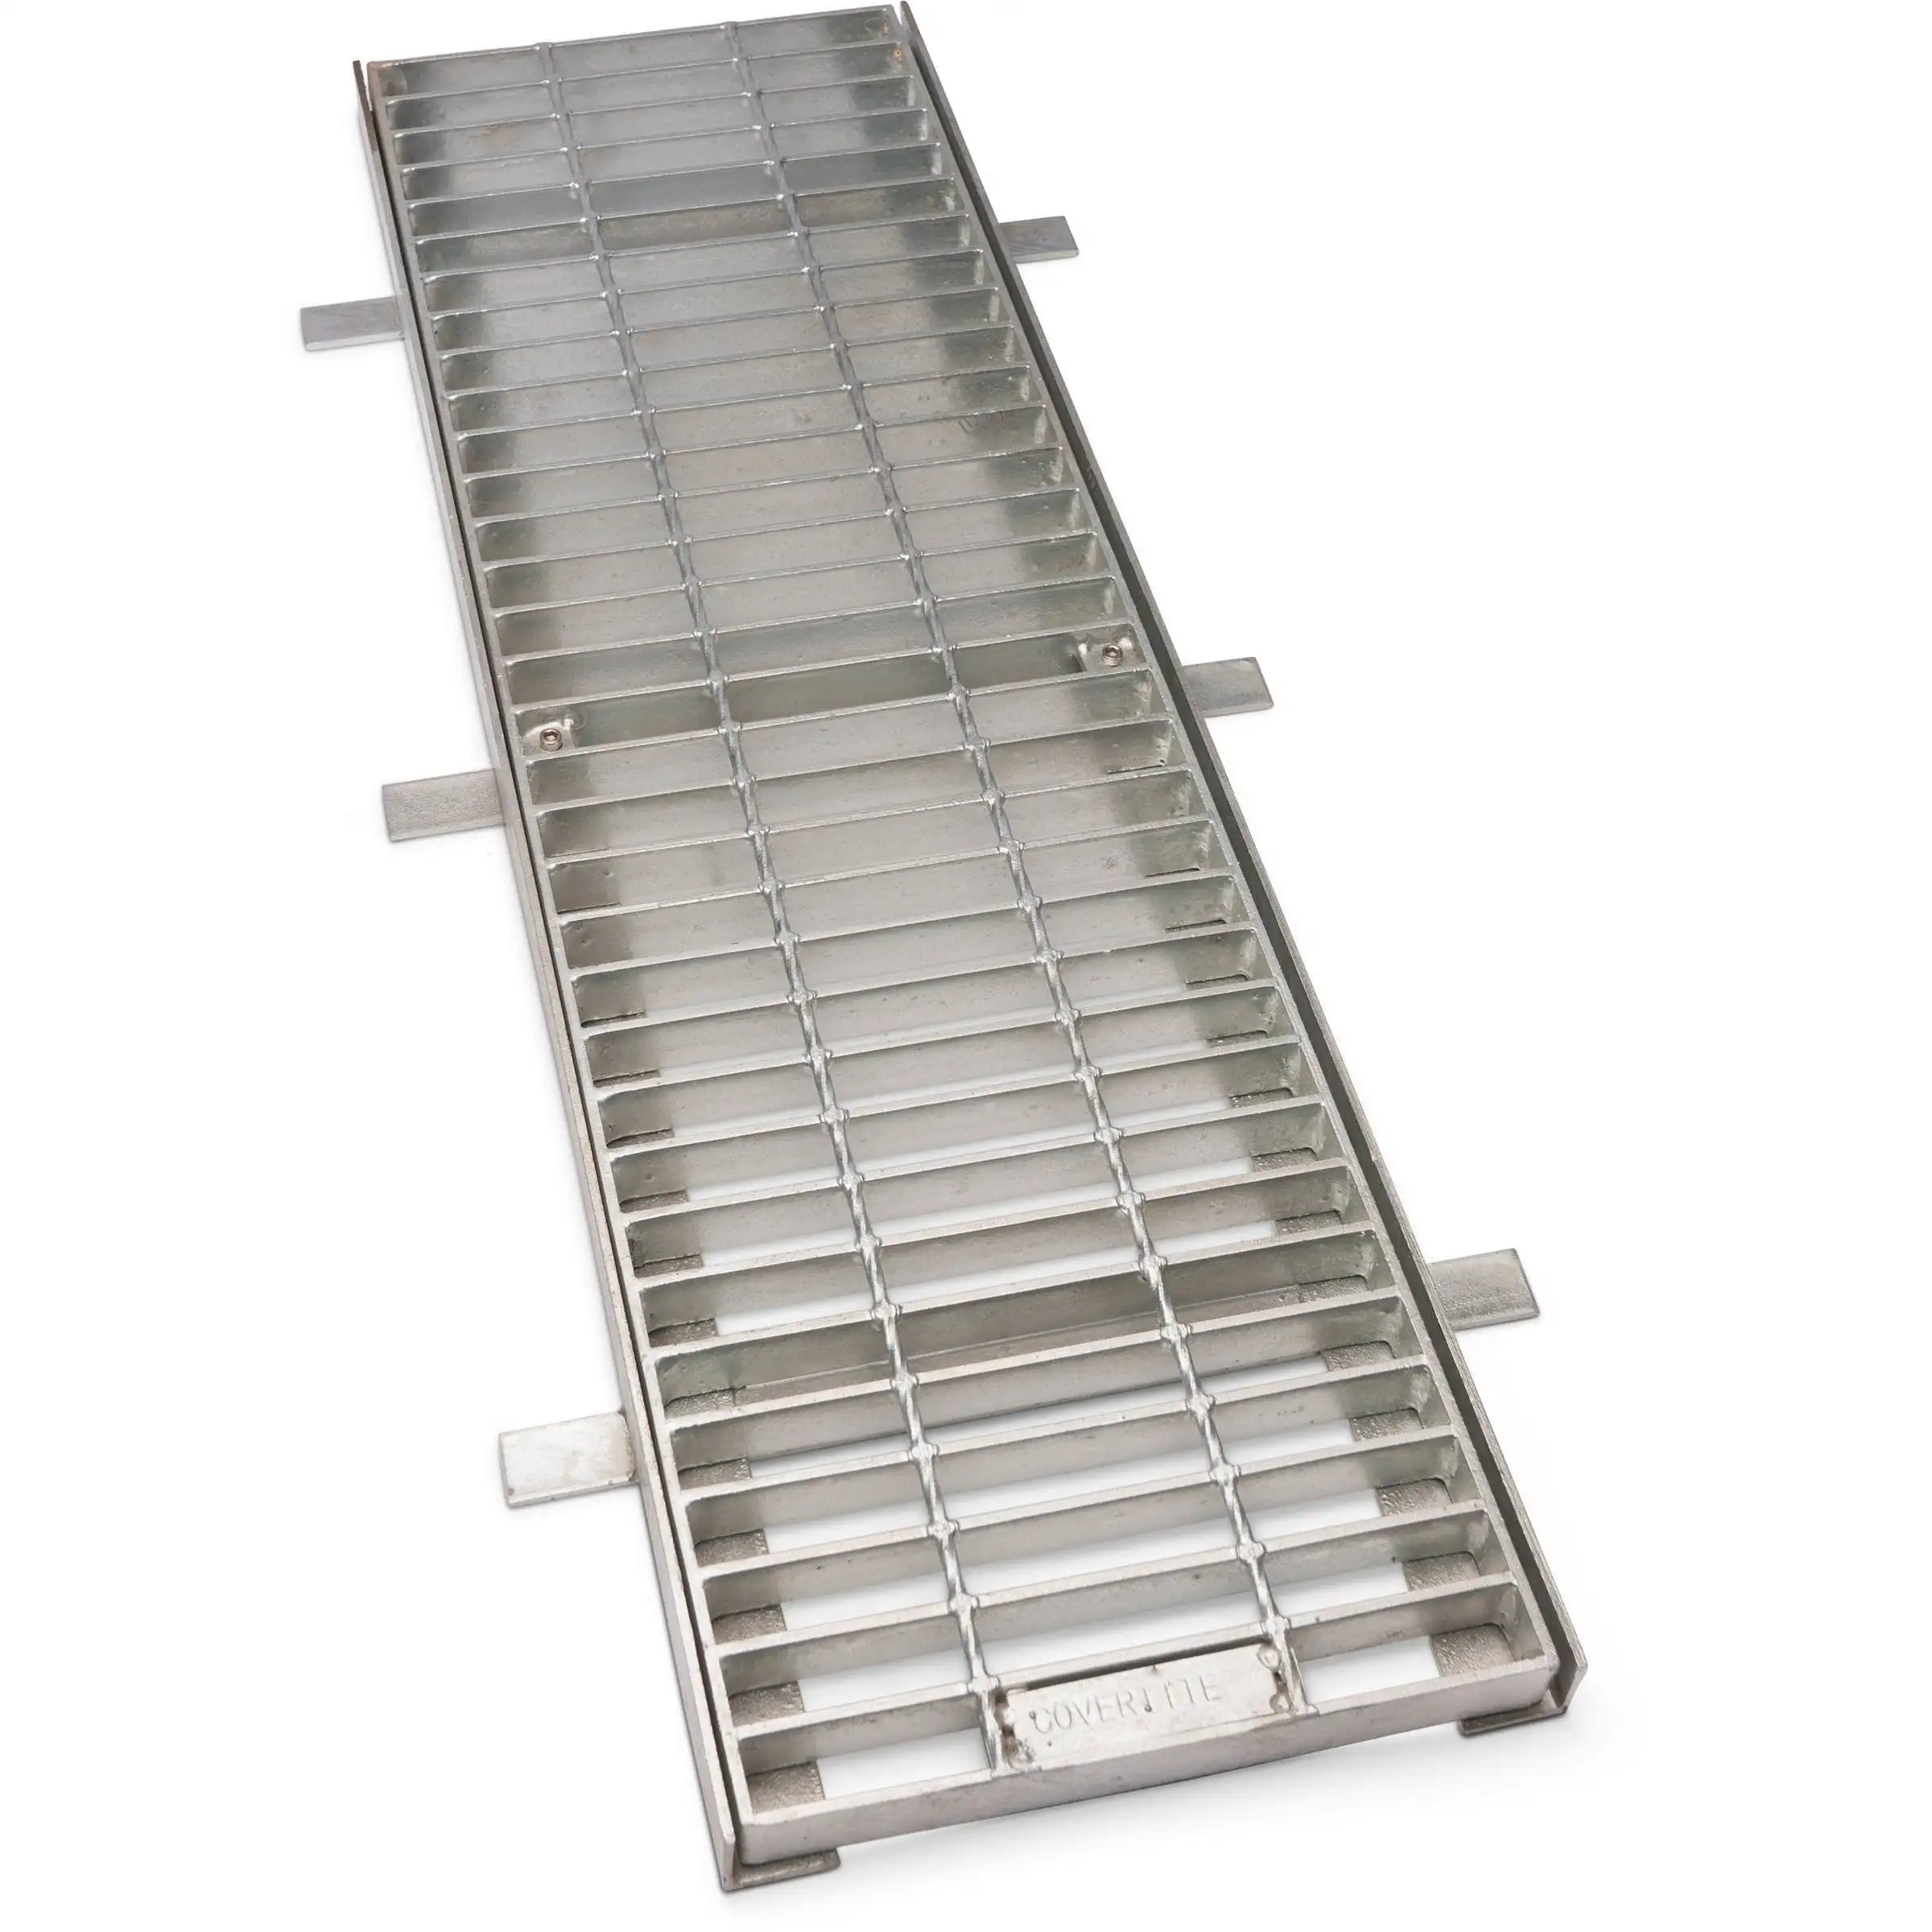 Hot Dipped Galvanized Rain Water Drainage Trench Steel Grating Road Driveway Trench Drain Cover